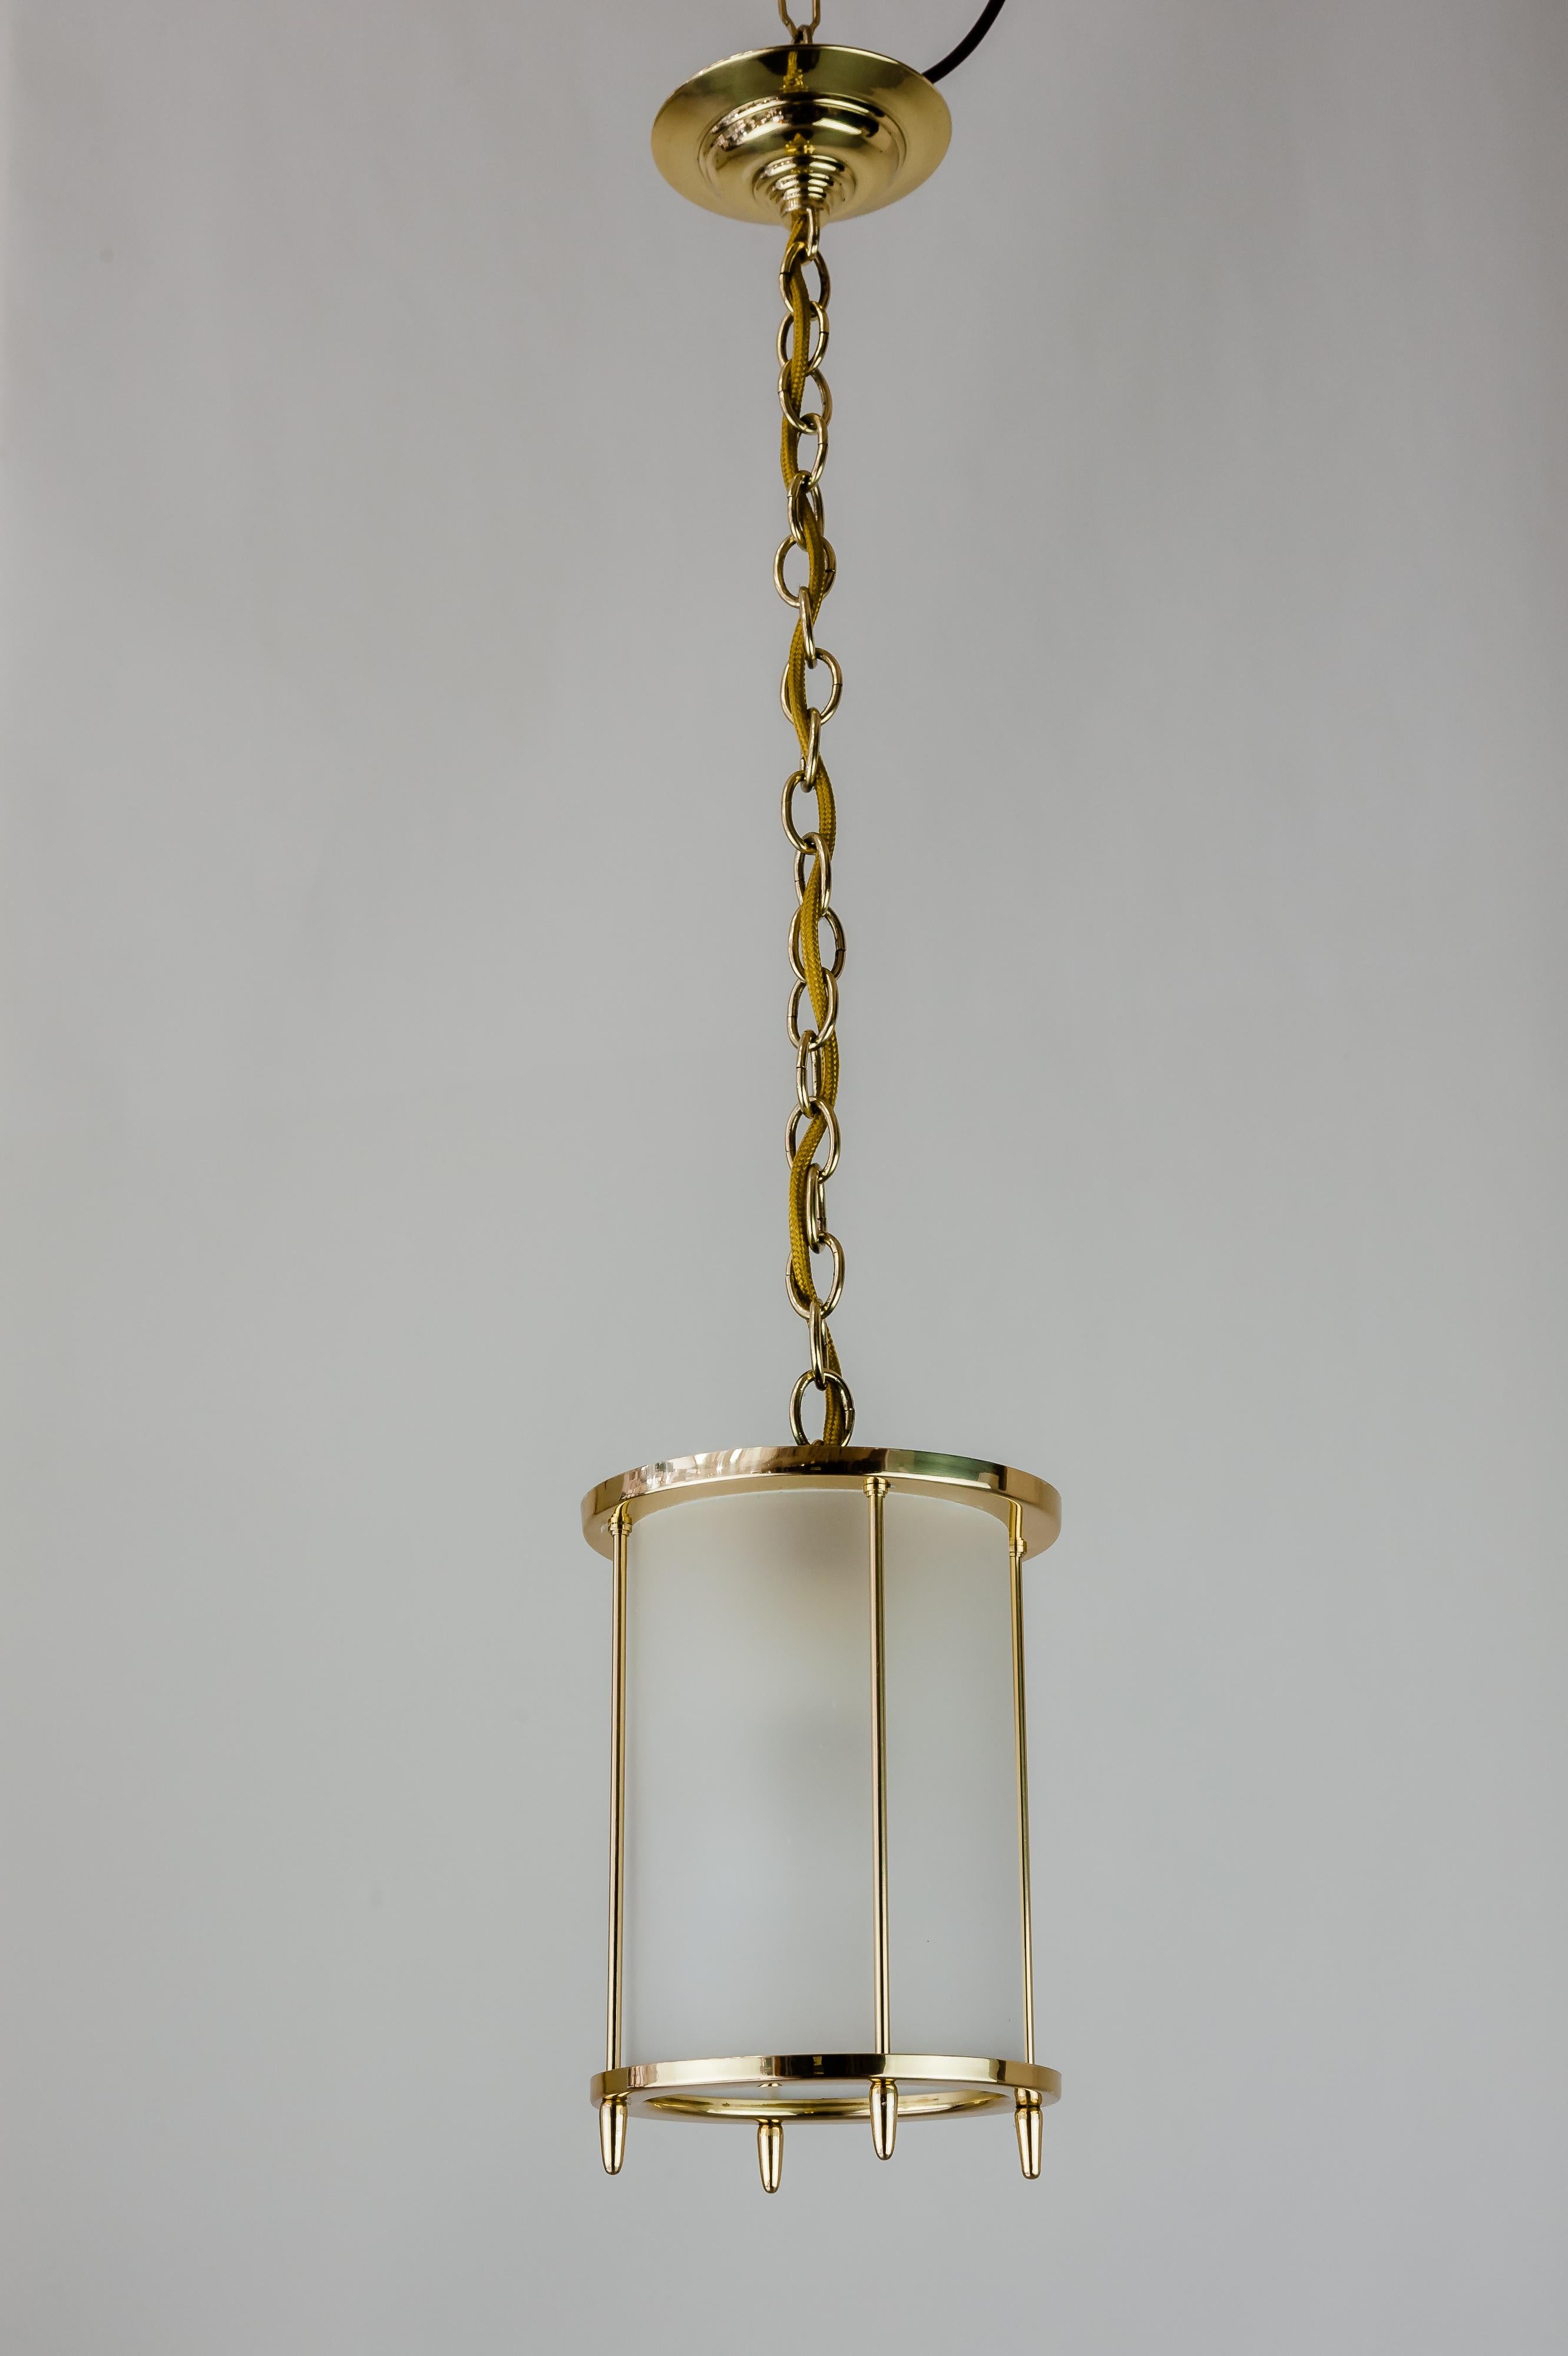 Art Deco pendant, circa 1920s.
Polished and stove enameled
Original frosted glass.